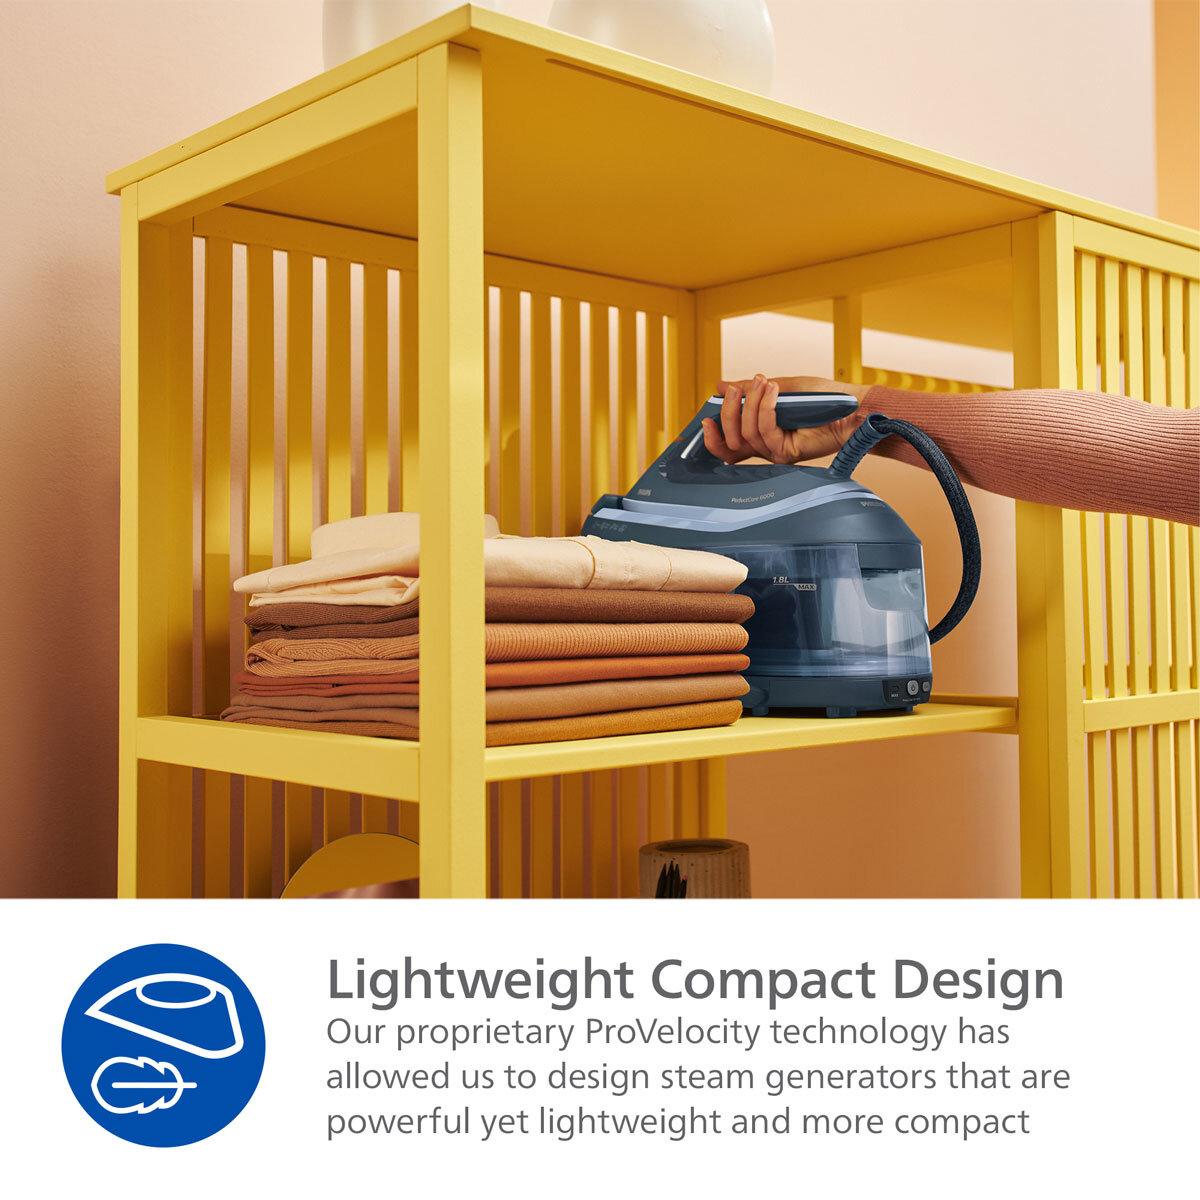 Lifestyle Image Showing Compact Design